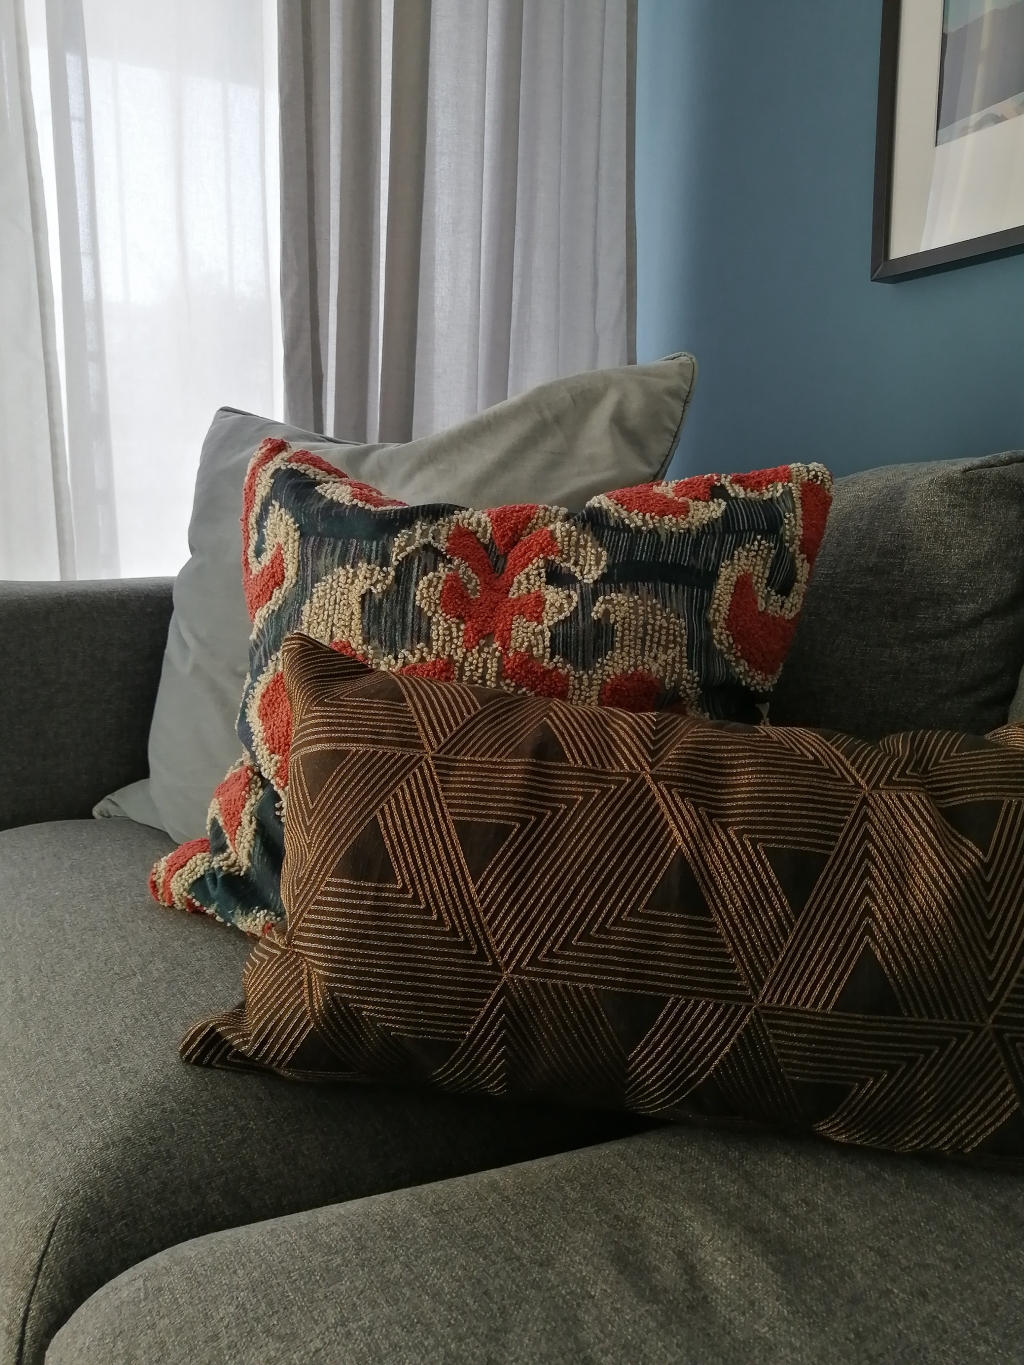 Throw pillow styling. How we did it in our living